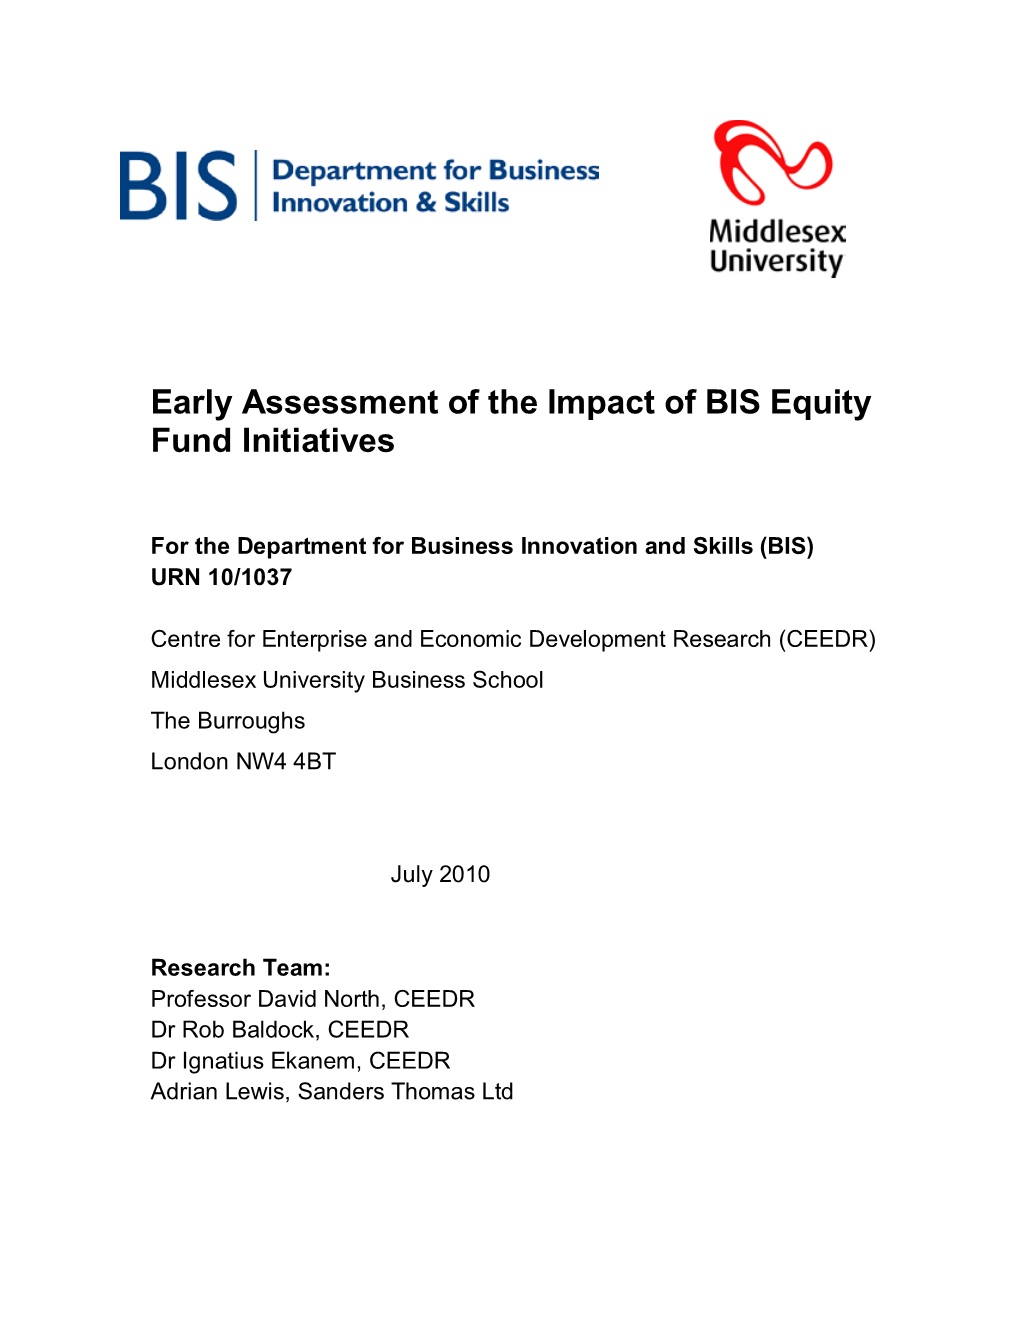 Early Assessment of the Impact of BIS Equity Fund Initiatives